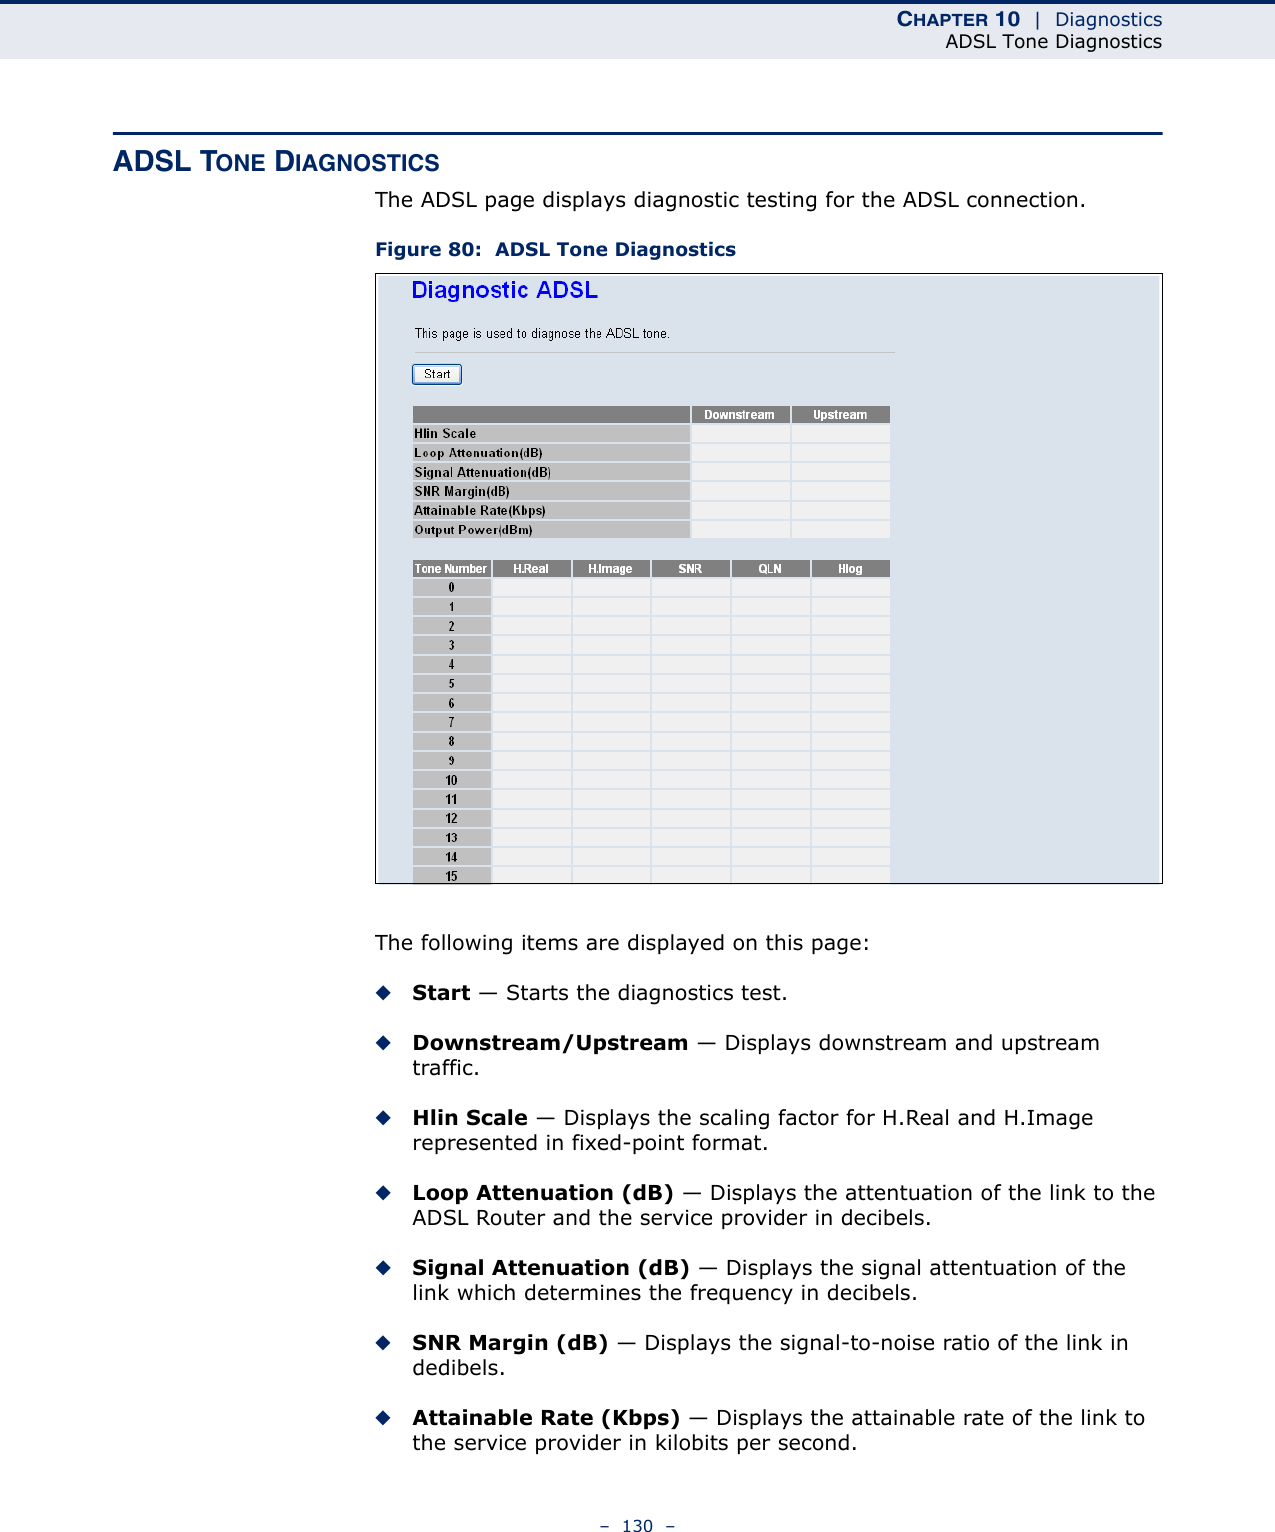 CHAPTER 10  |  DiagnosticsADSL Tone Diagnostics–  130  –ADSL TONE DIAGNOSTICSThe ADSL page displays diagnostic testing for the ADSL connection.Figure 80:  ADSL Tone DiagnosticsThe following items are displayed on this page:◆Start — Starts the diagnostics test.◆Downstream/Upstream — Displays downstream and upstream traffic.◆Hlin Scale — Displays the scaling factor for H.Real and H.Image represented in fixed-point format.◆Loop Attenuation (dB) — Displays the attentuation of the link to the ADSL Router and the service provider in decibels.◆Signal Attenuation (dB) — Displays the signal attentuation of the link which determines the frequency in decibels.◆SNR Margin (dB) — Displays the signal-to-noise ratio of the link in dedibels.◆Attainable Rate (Kbps) — Displays the attainable rate of the link to the service provider in kilobits per second.